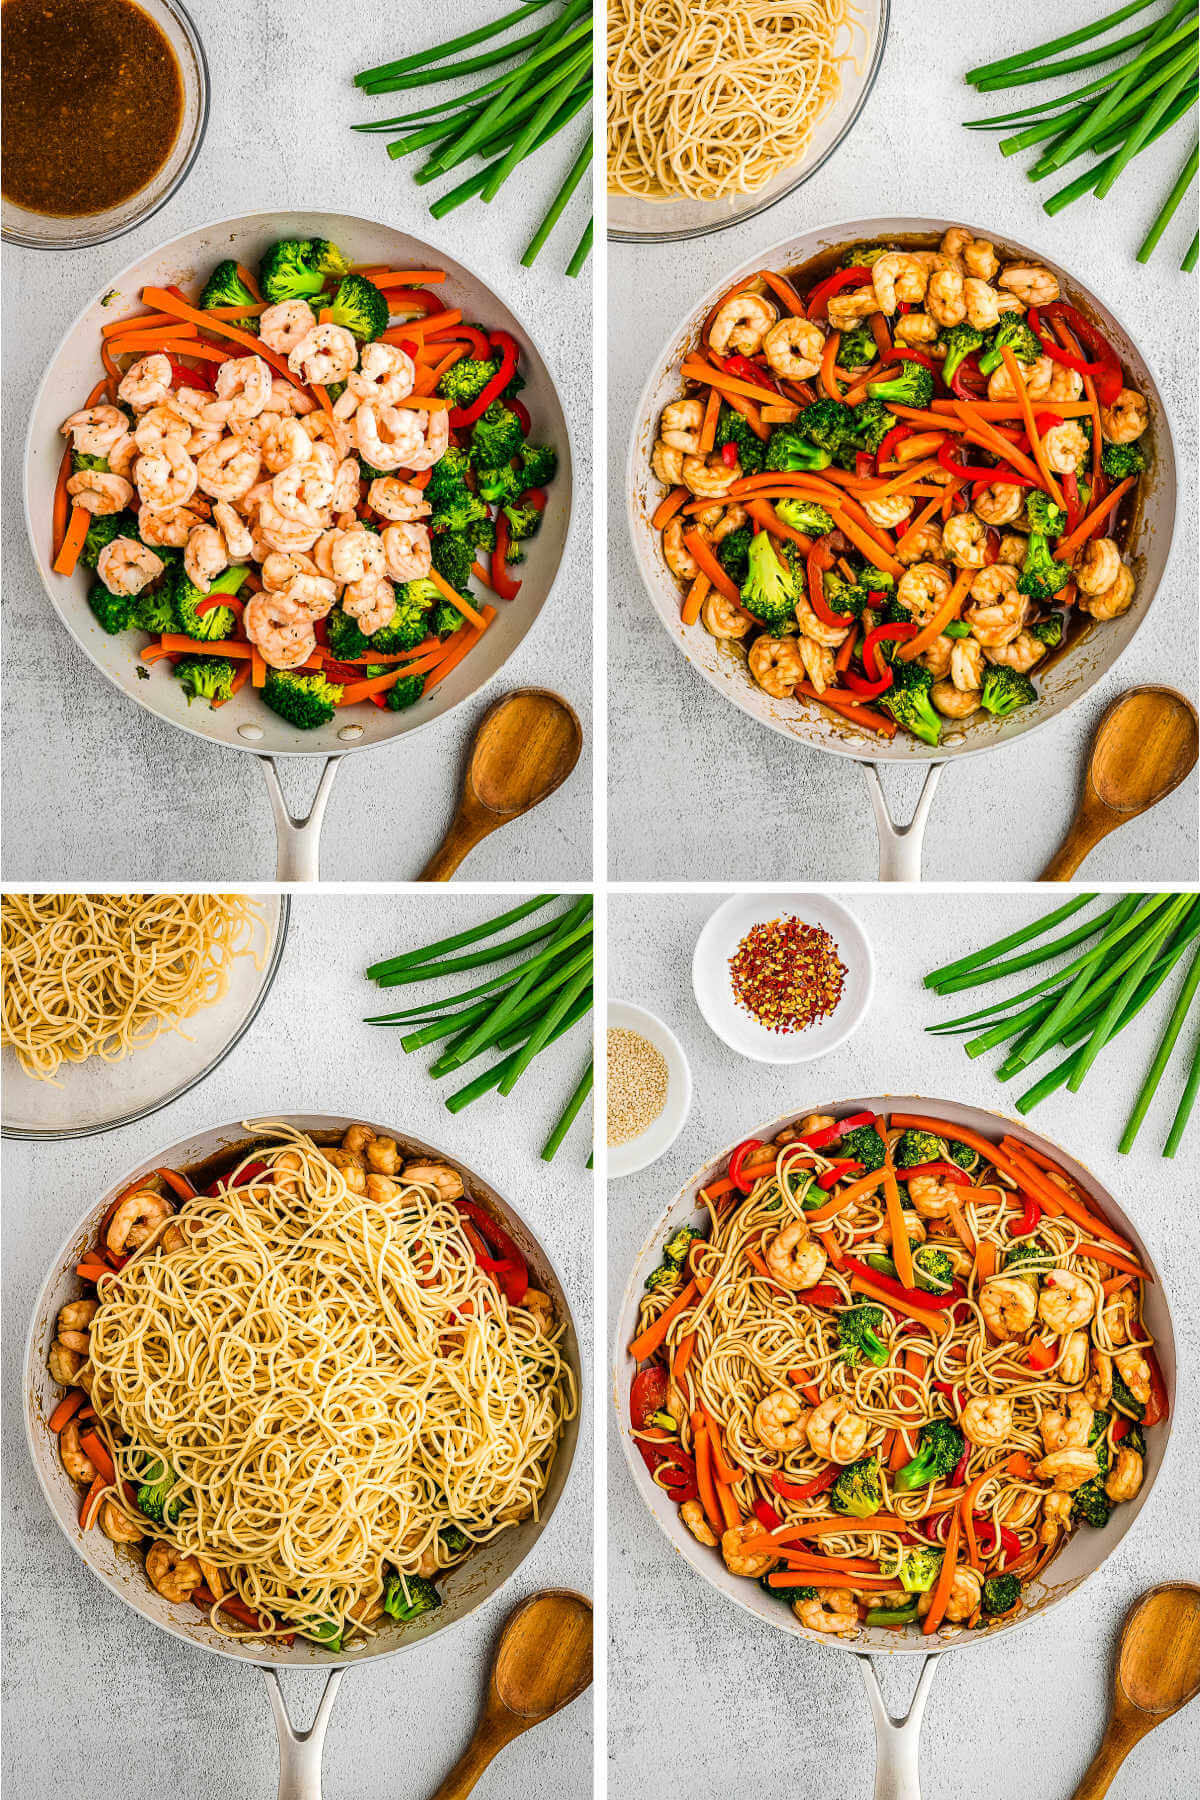 Combining cooked shrimp, vegetables, noodles, and sauce in a large skillet.